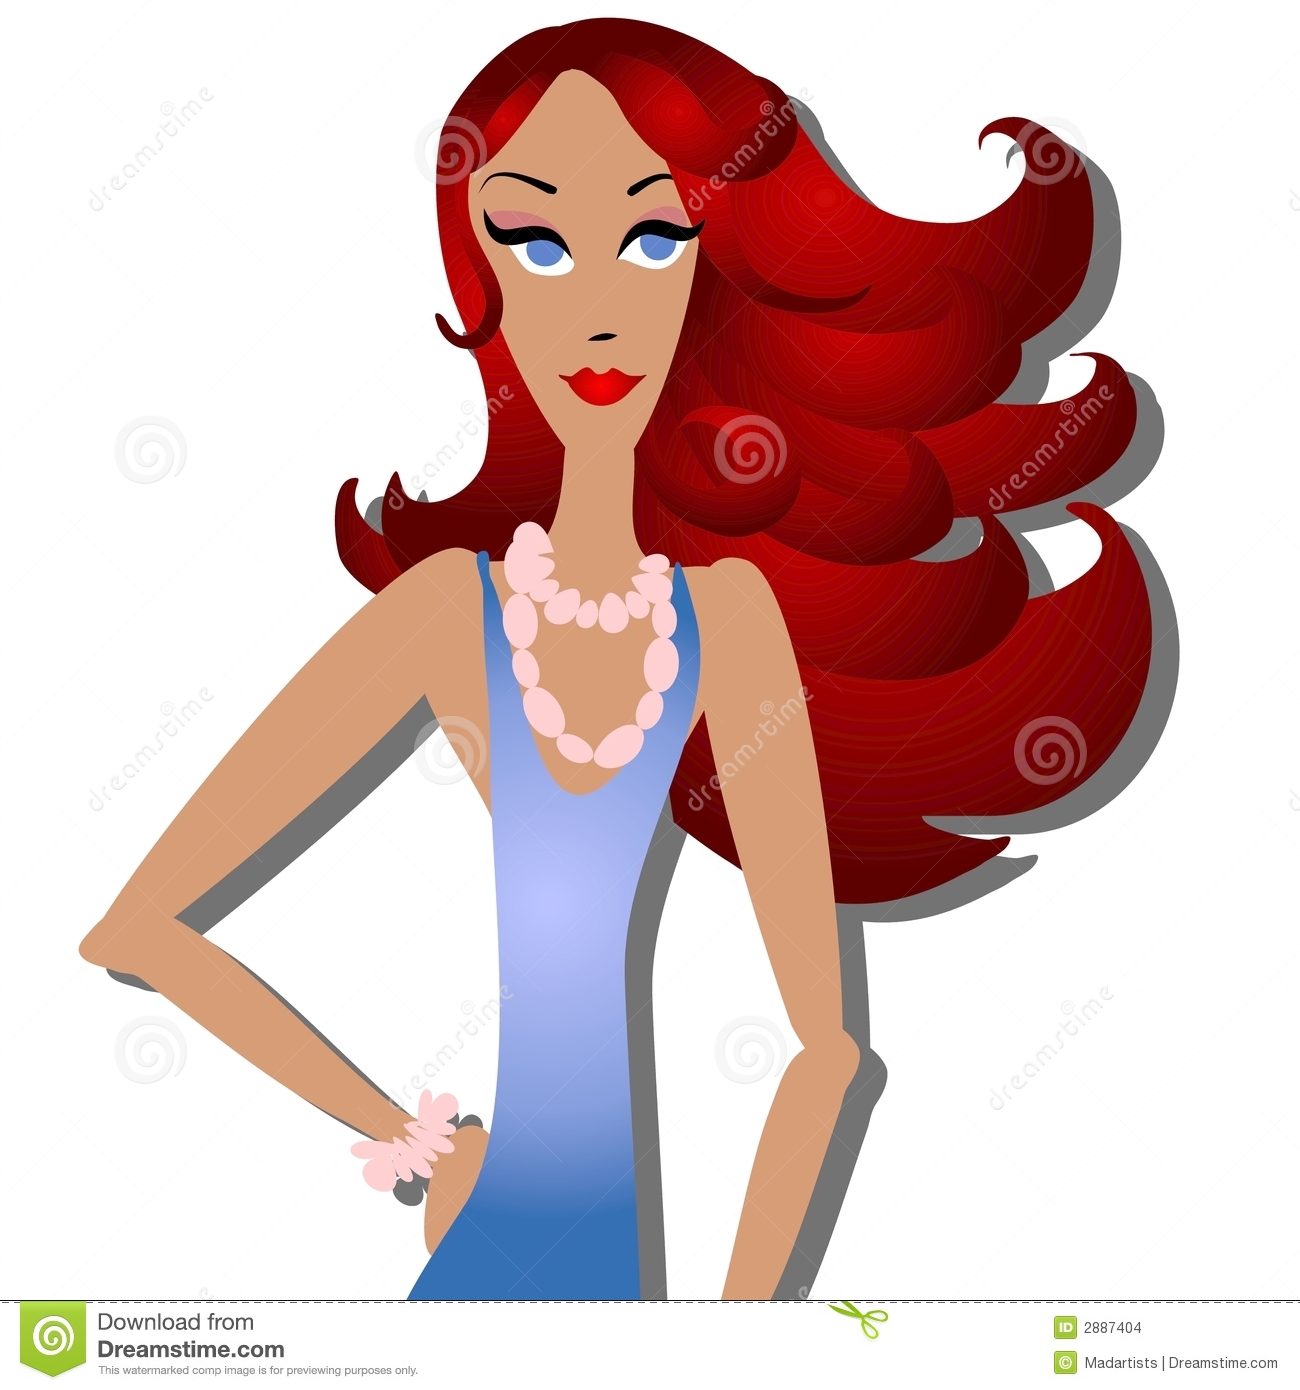 Clip Art Illustration Of A Thin Redheaded Woman With Long Hair Wearing